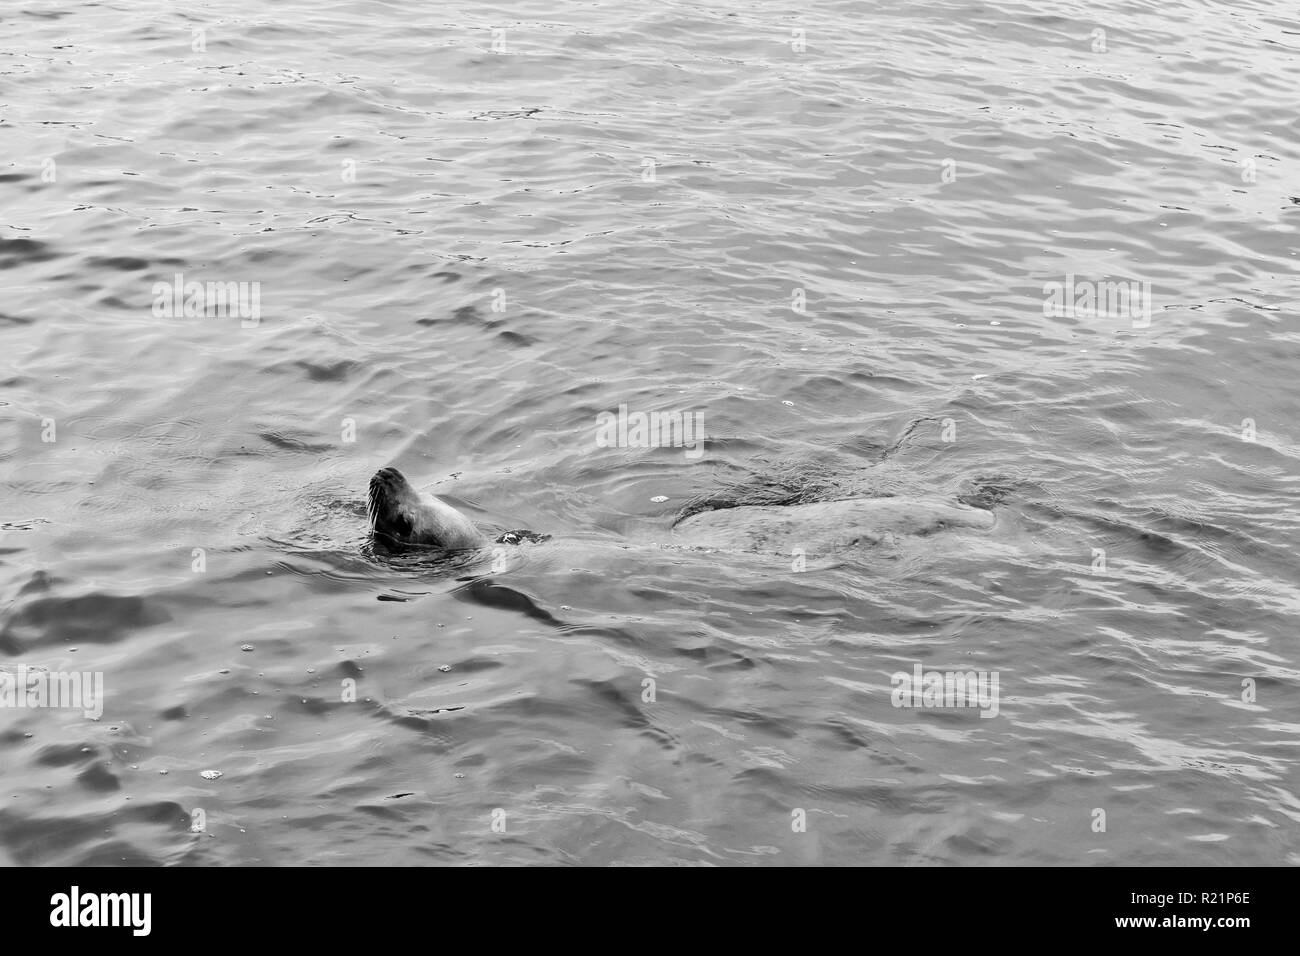 Sea Lion swimming with head out of water in black and white Stock Photo